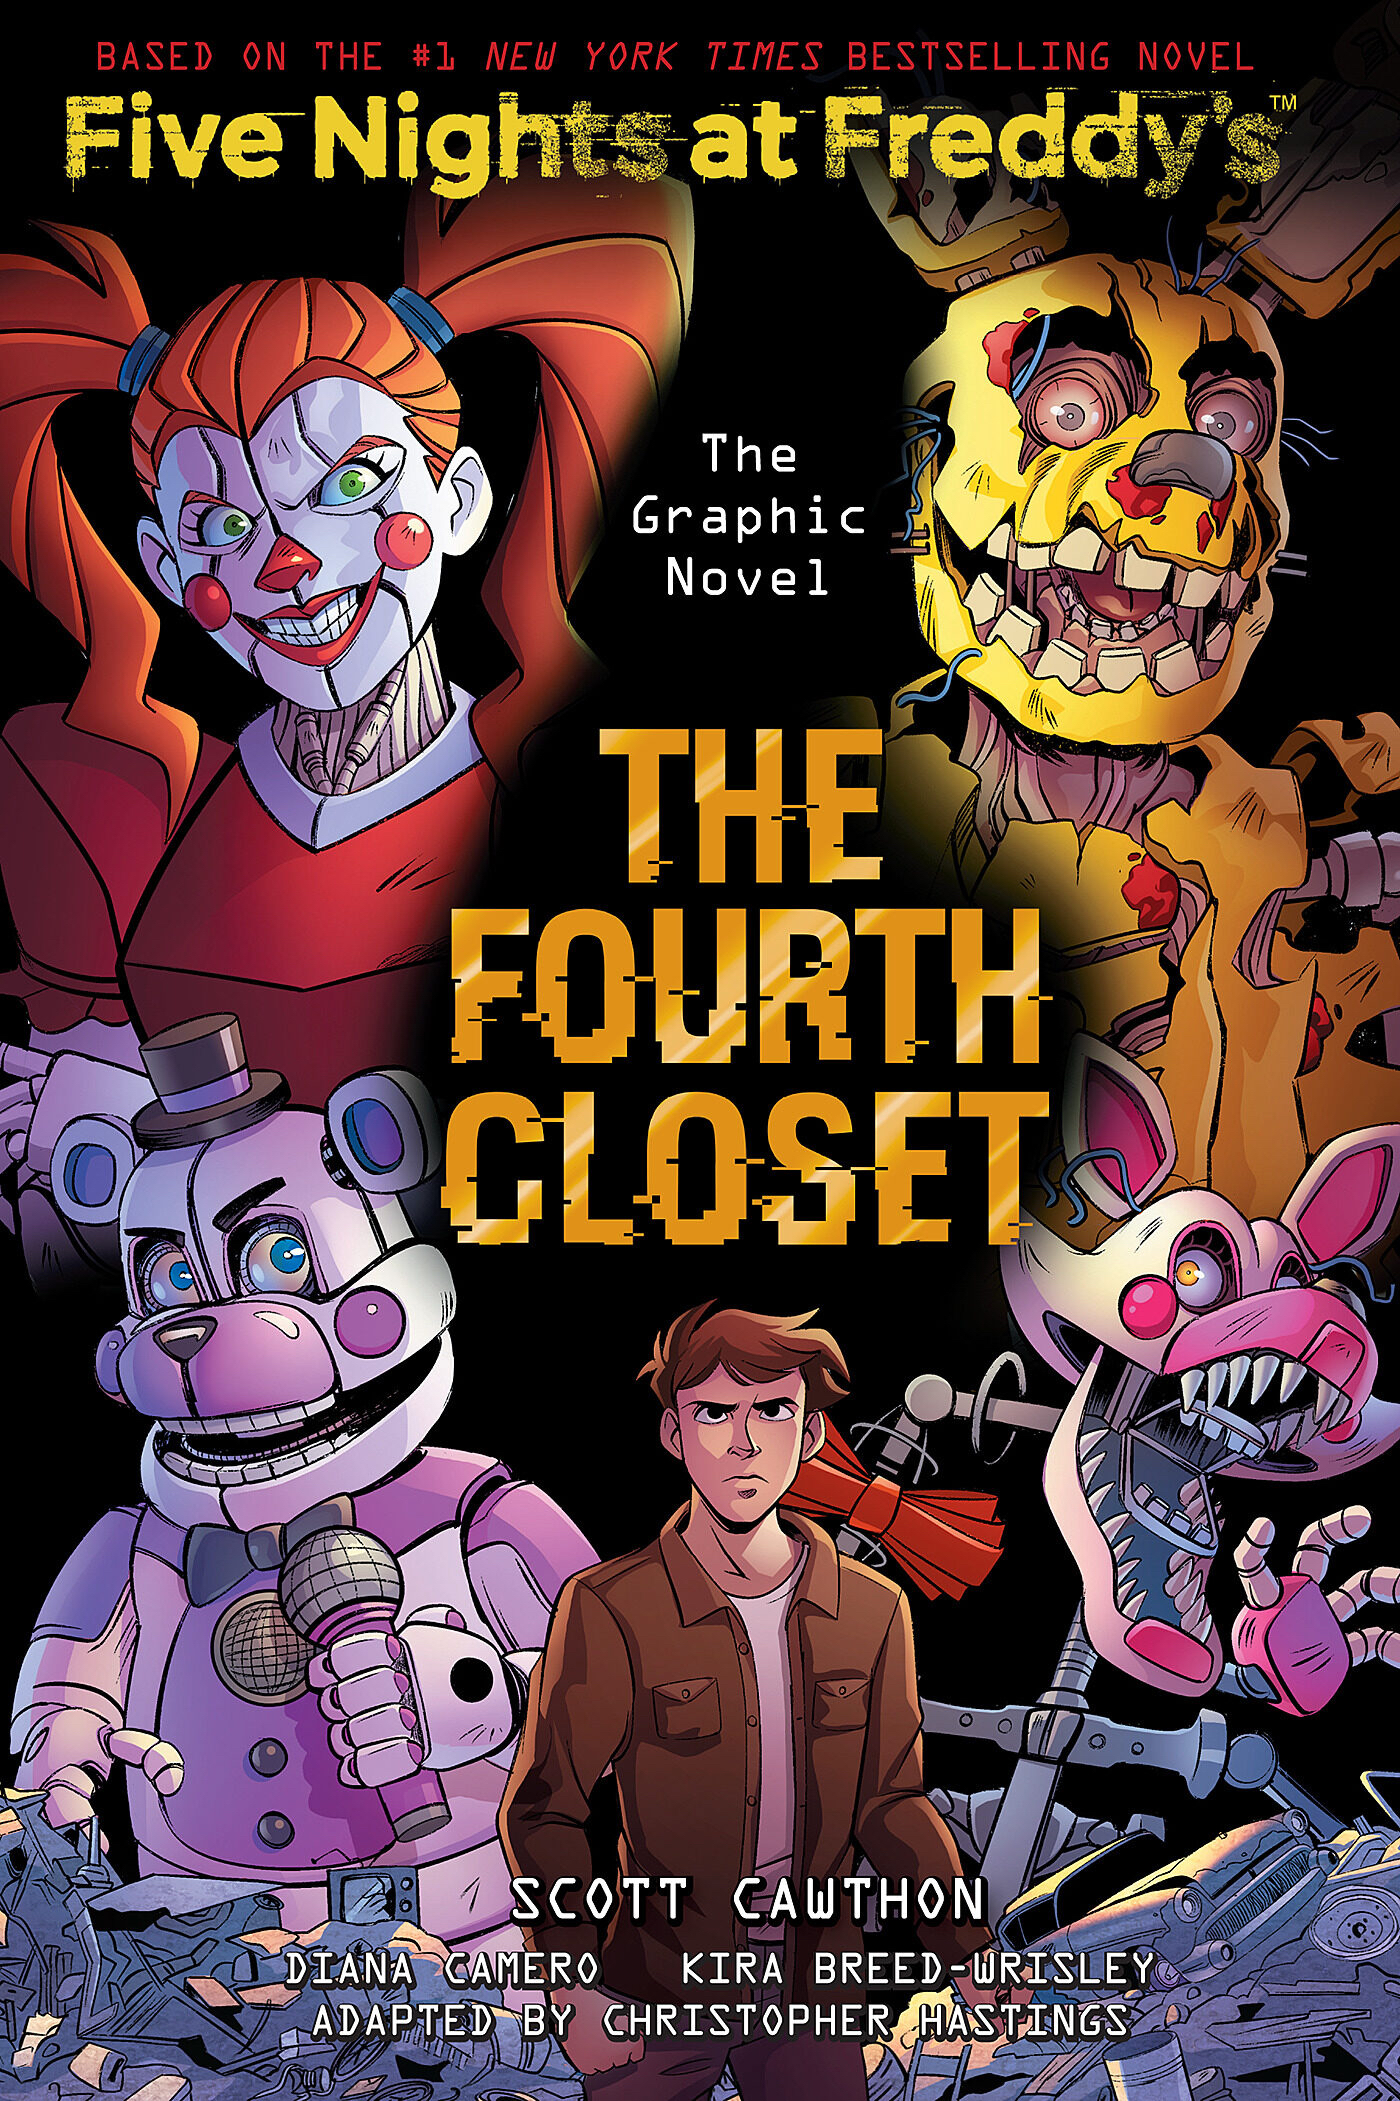  Five Nights at Freddy's: The Official Movie Novel